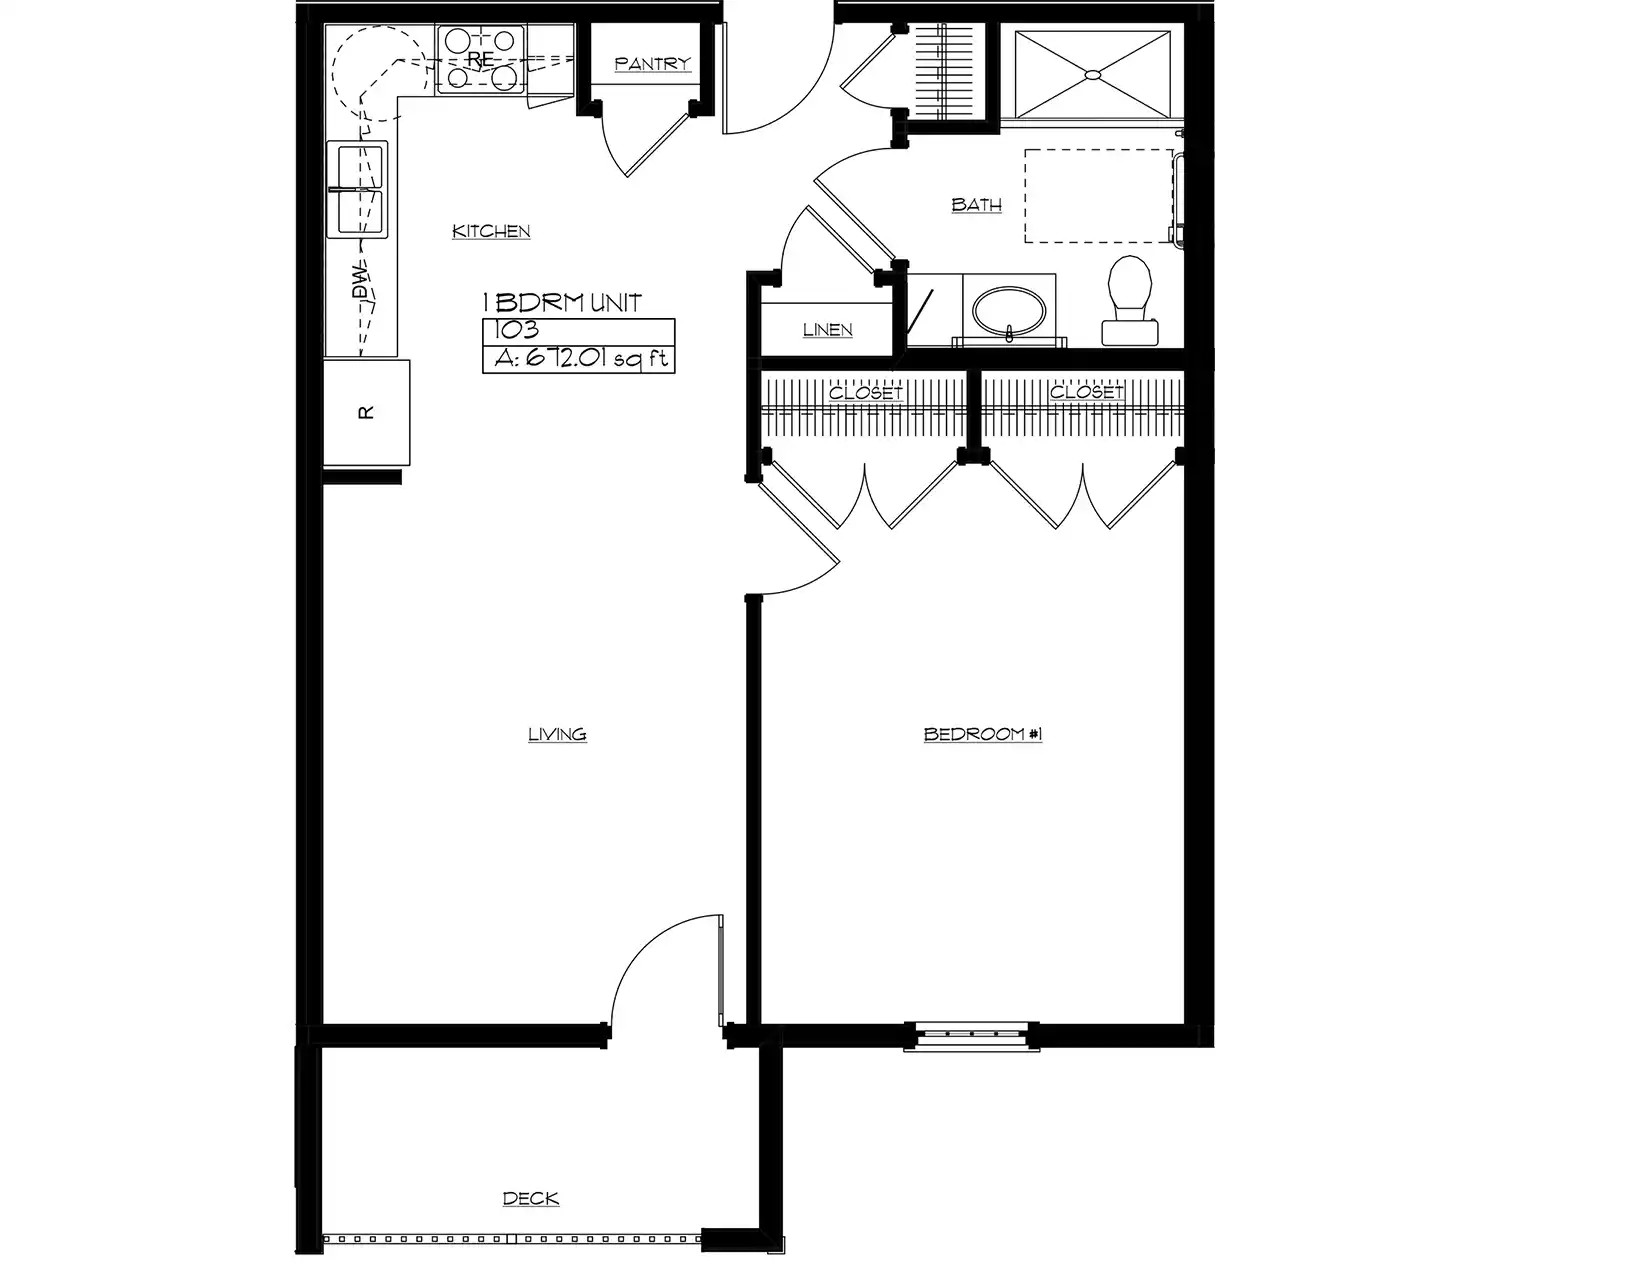 1 bedroom apartment - approximately 672 square feet